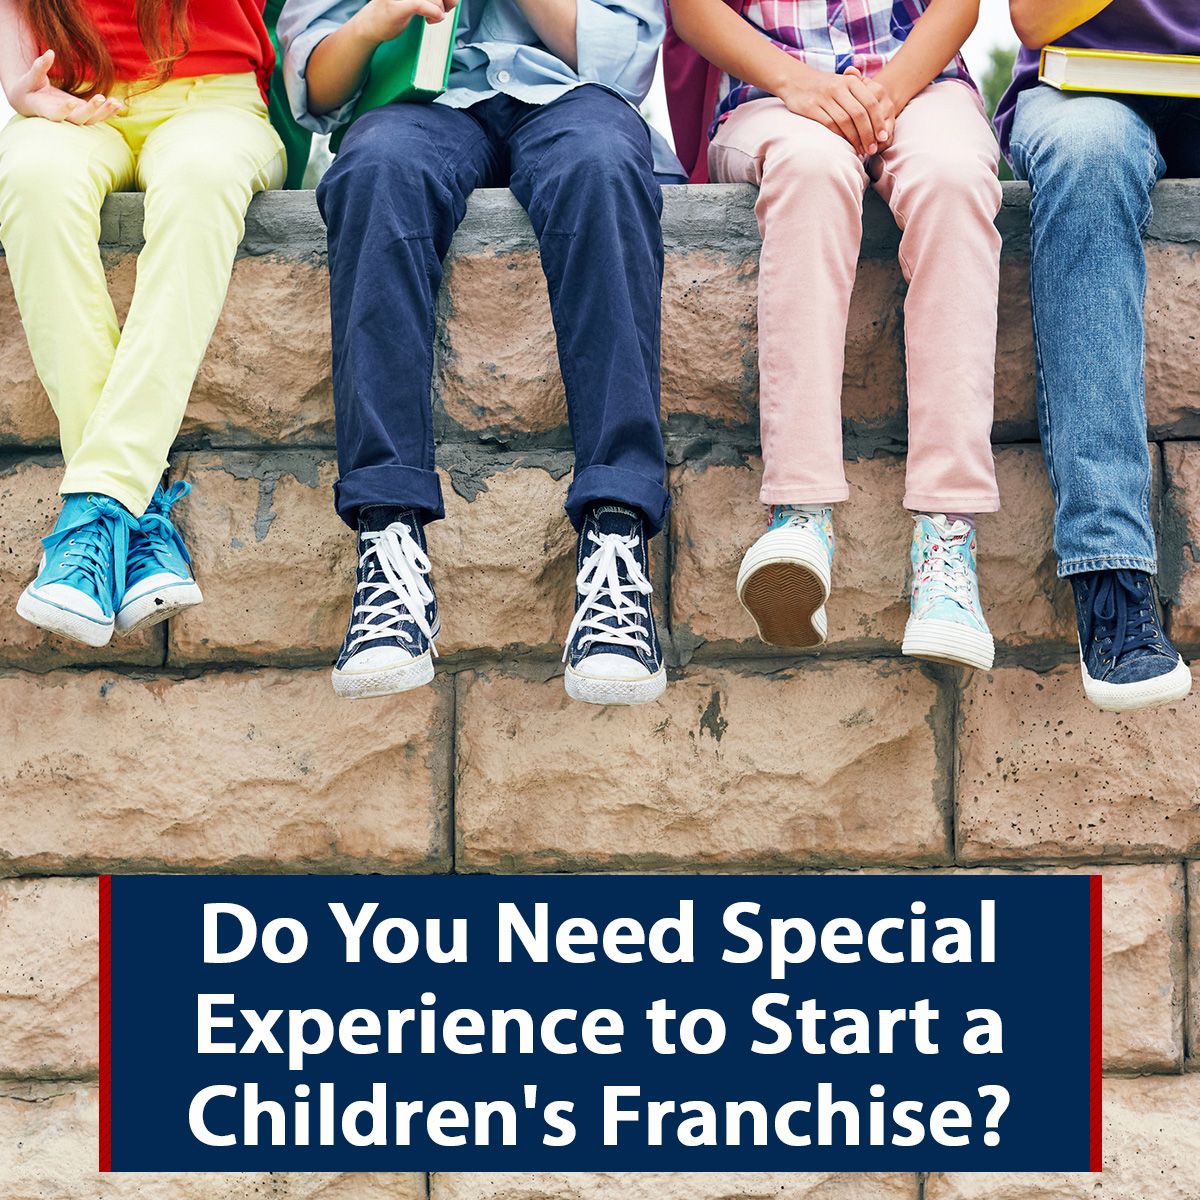 Do You Need Special Experience to Start a Children's Franchise?